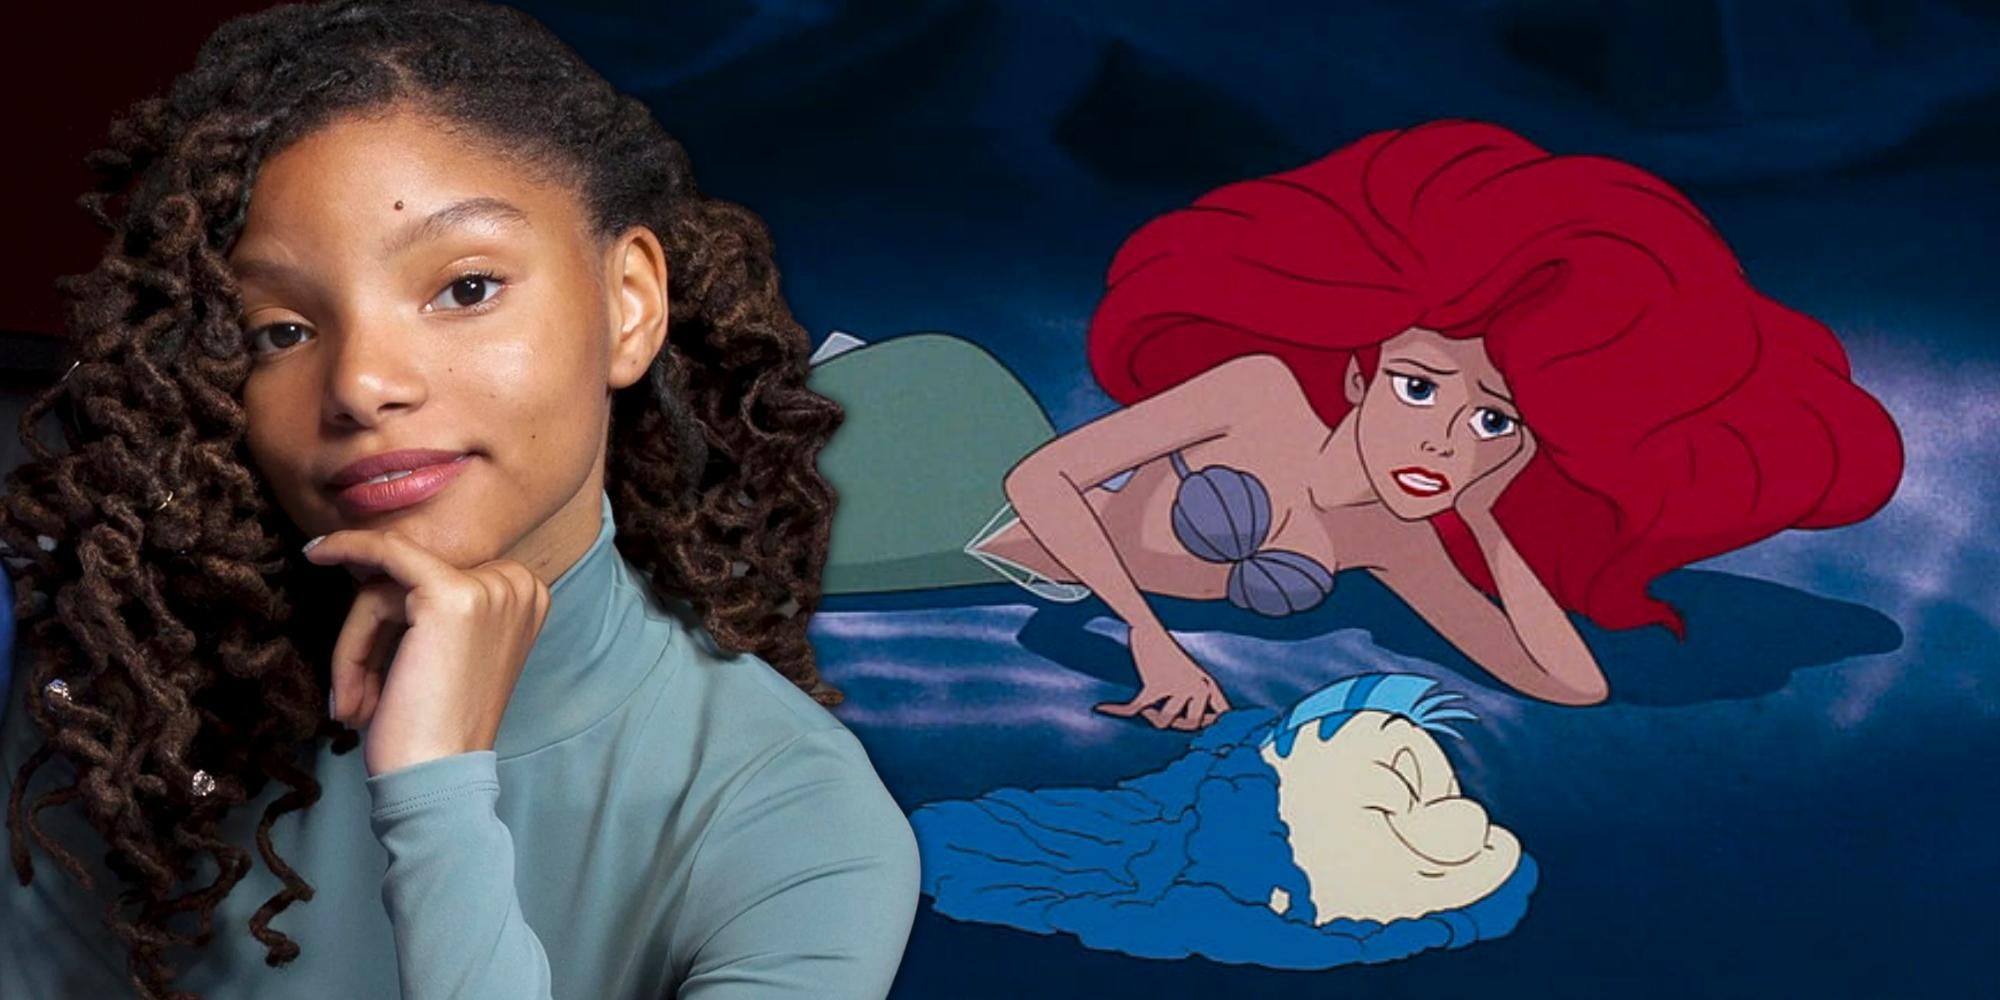 Halle Bailey smiling, a still of Ariel and Flounder from the Disney animated film the Little Mermaid